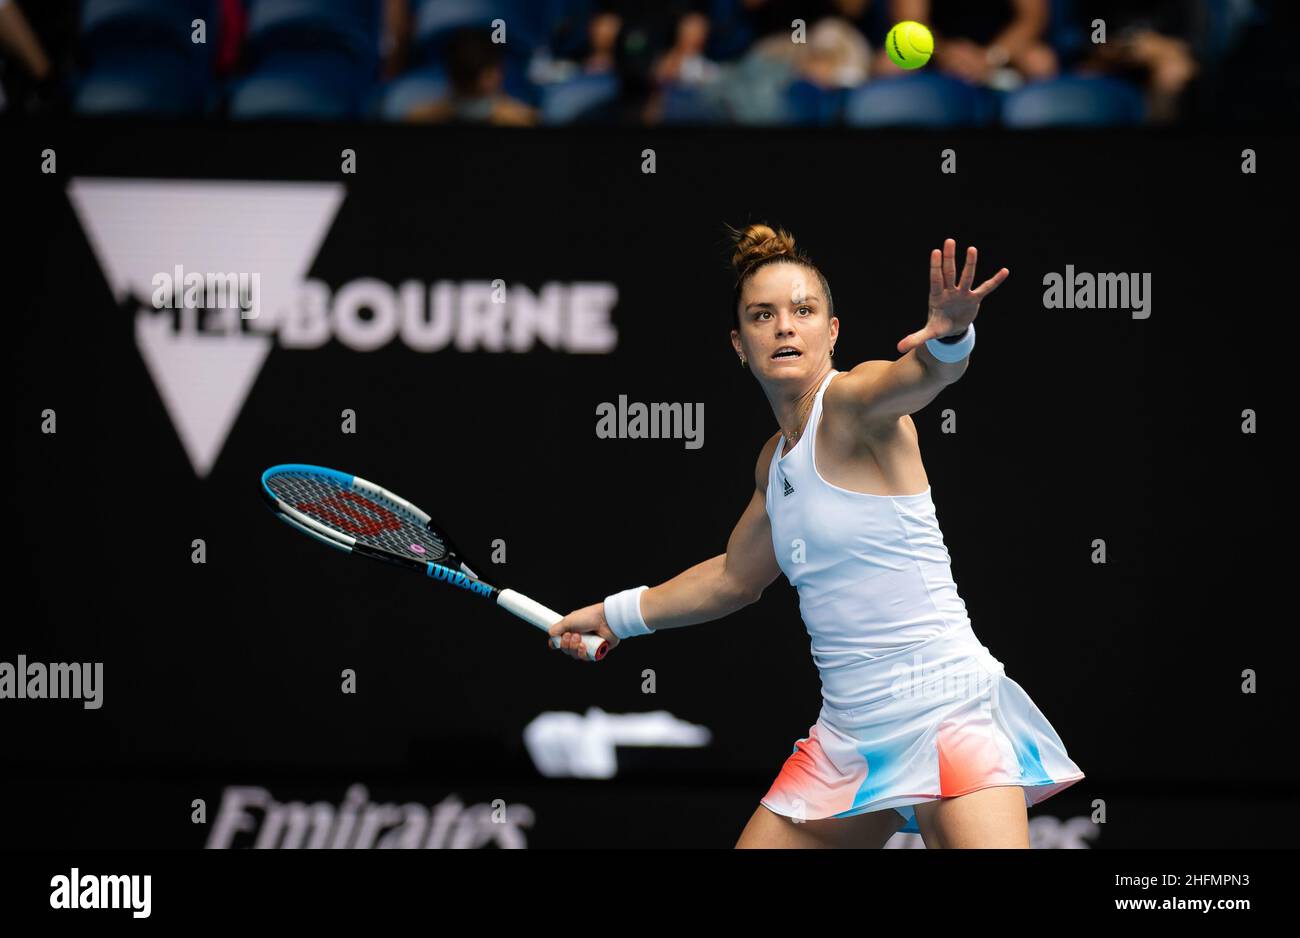 Maria Sakkari of Greece in action against Tatjana Maria of Germany during the first round of the 2022 Australian Open, WTA Grand Slam tennis tournament on January 17, 2022 at Melbourne Park